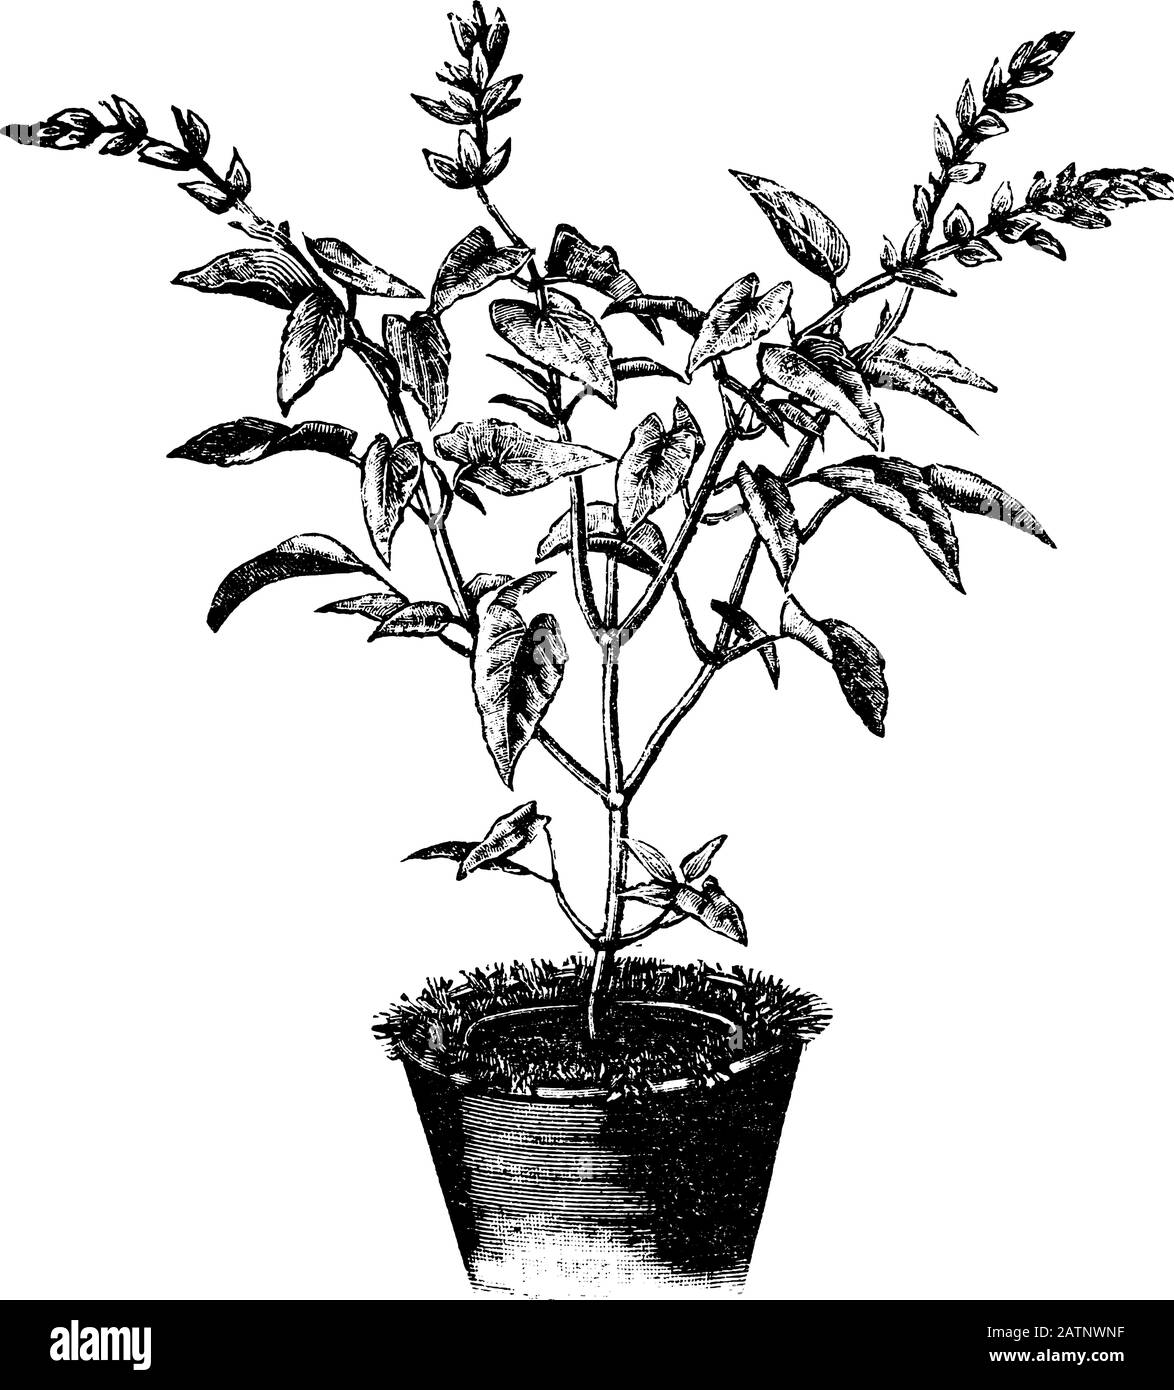 Antique vintage line art illustration, engraving or drawing of Salvia flower or plant in pot or flowerpot . From book Plants in Room, Prague, 1898. Stock Vector